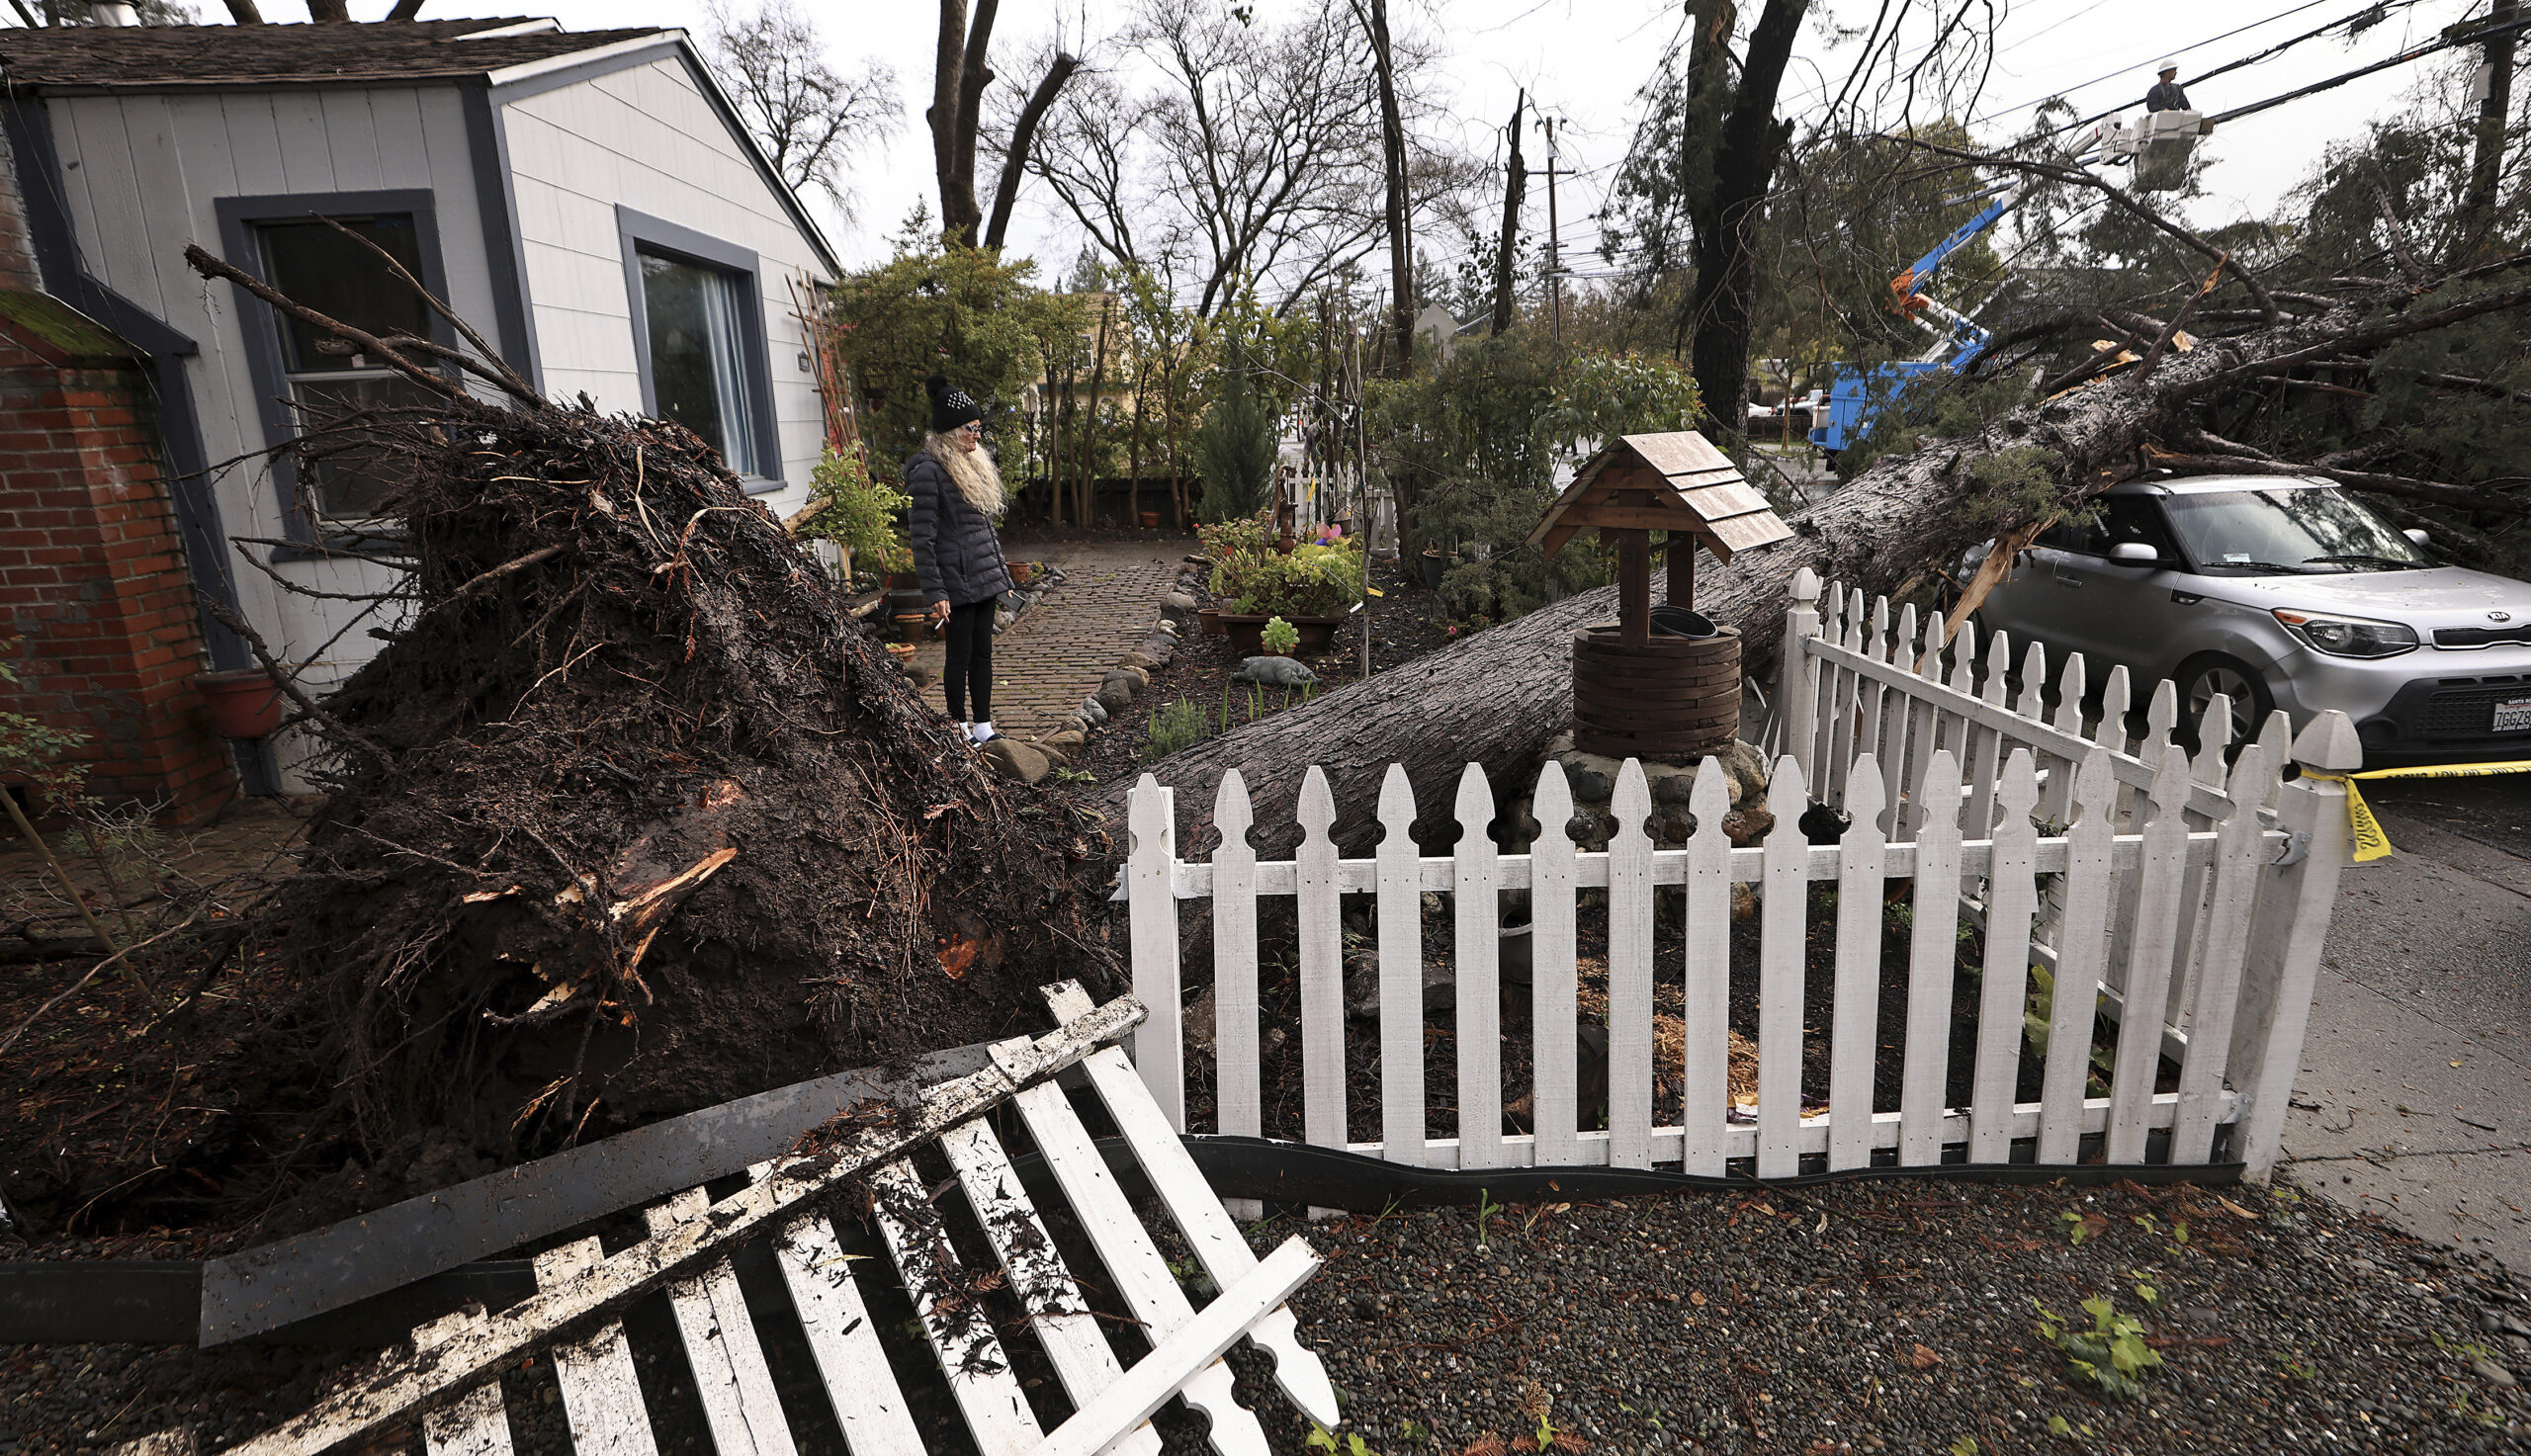 Helena Zappelli surveys the damage to her yard and vehicle after a large tree fell over, Tuesday, M...